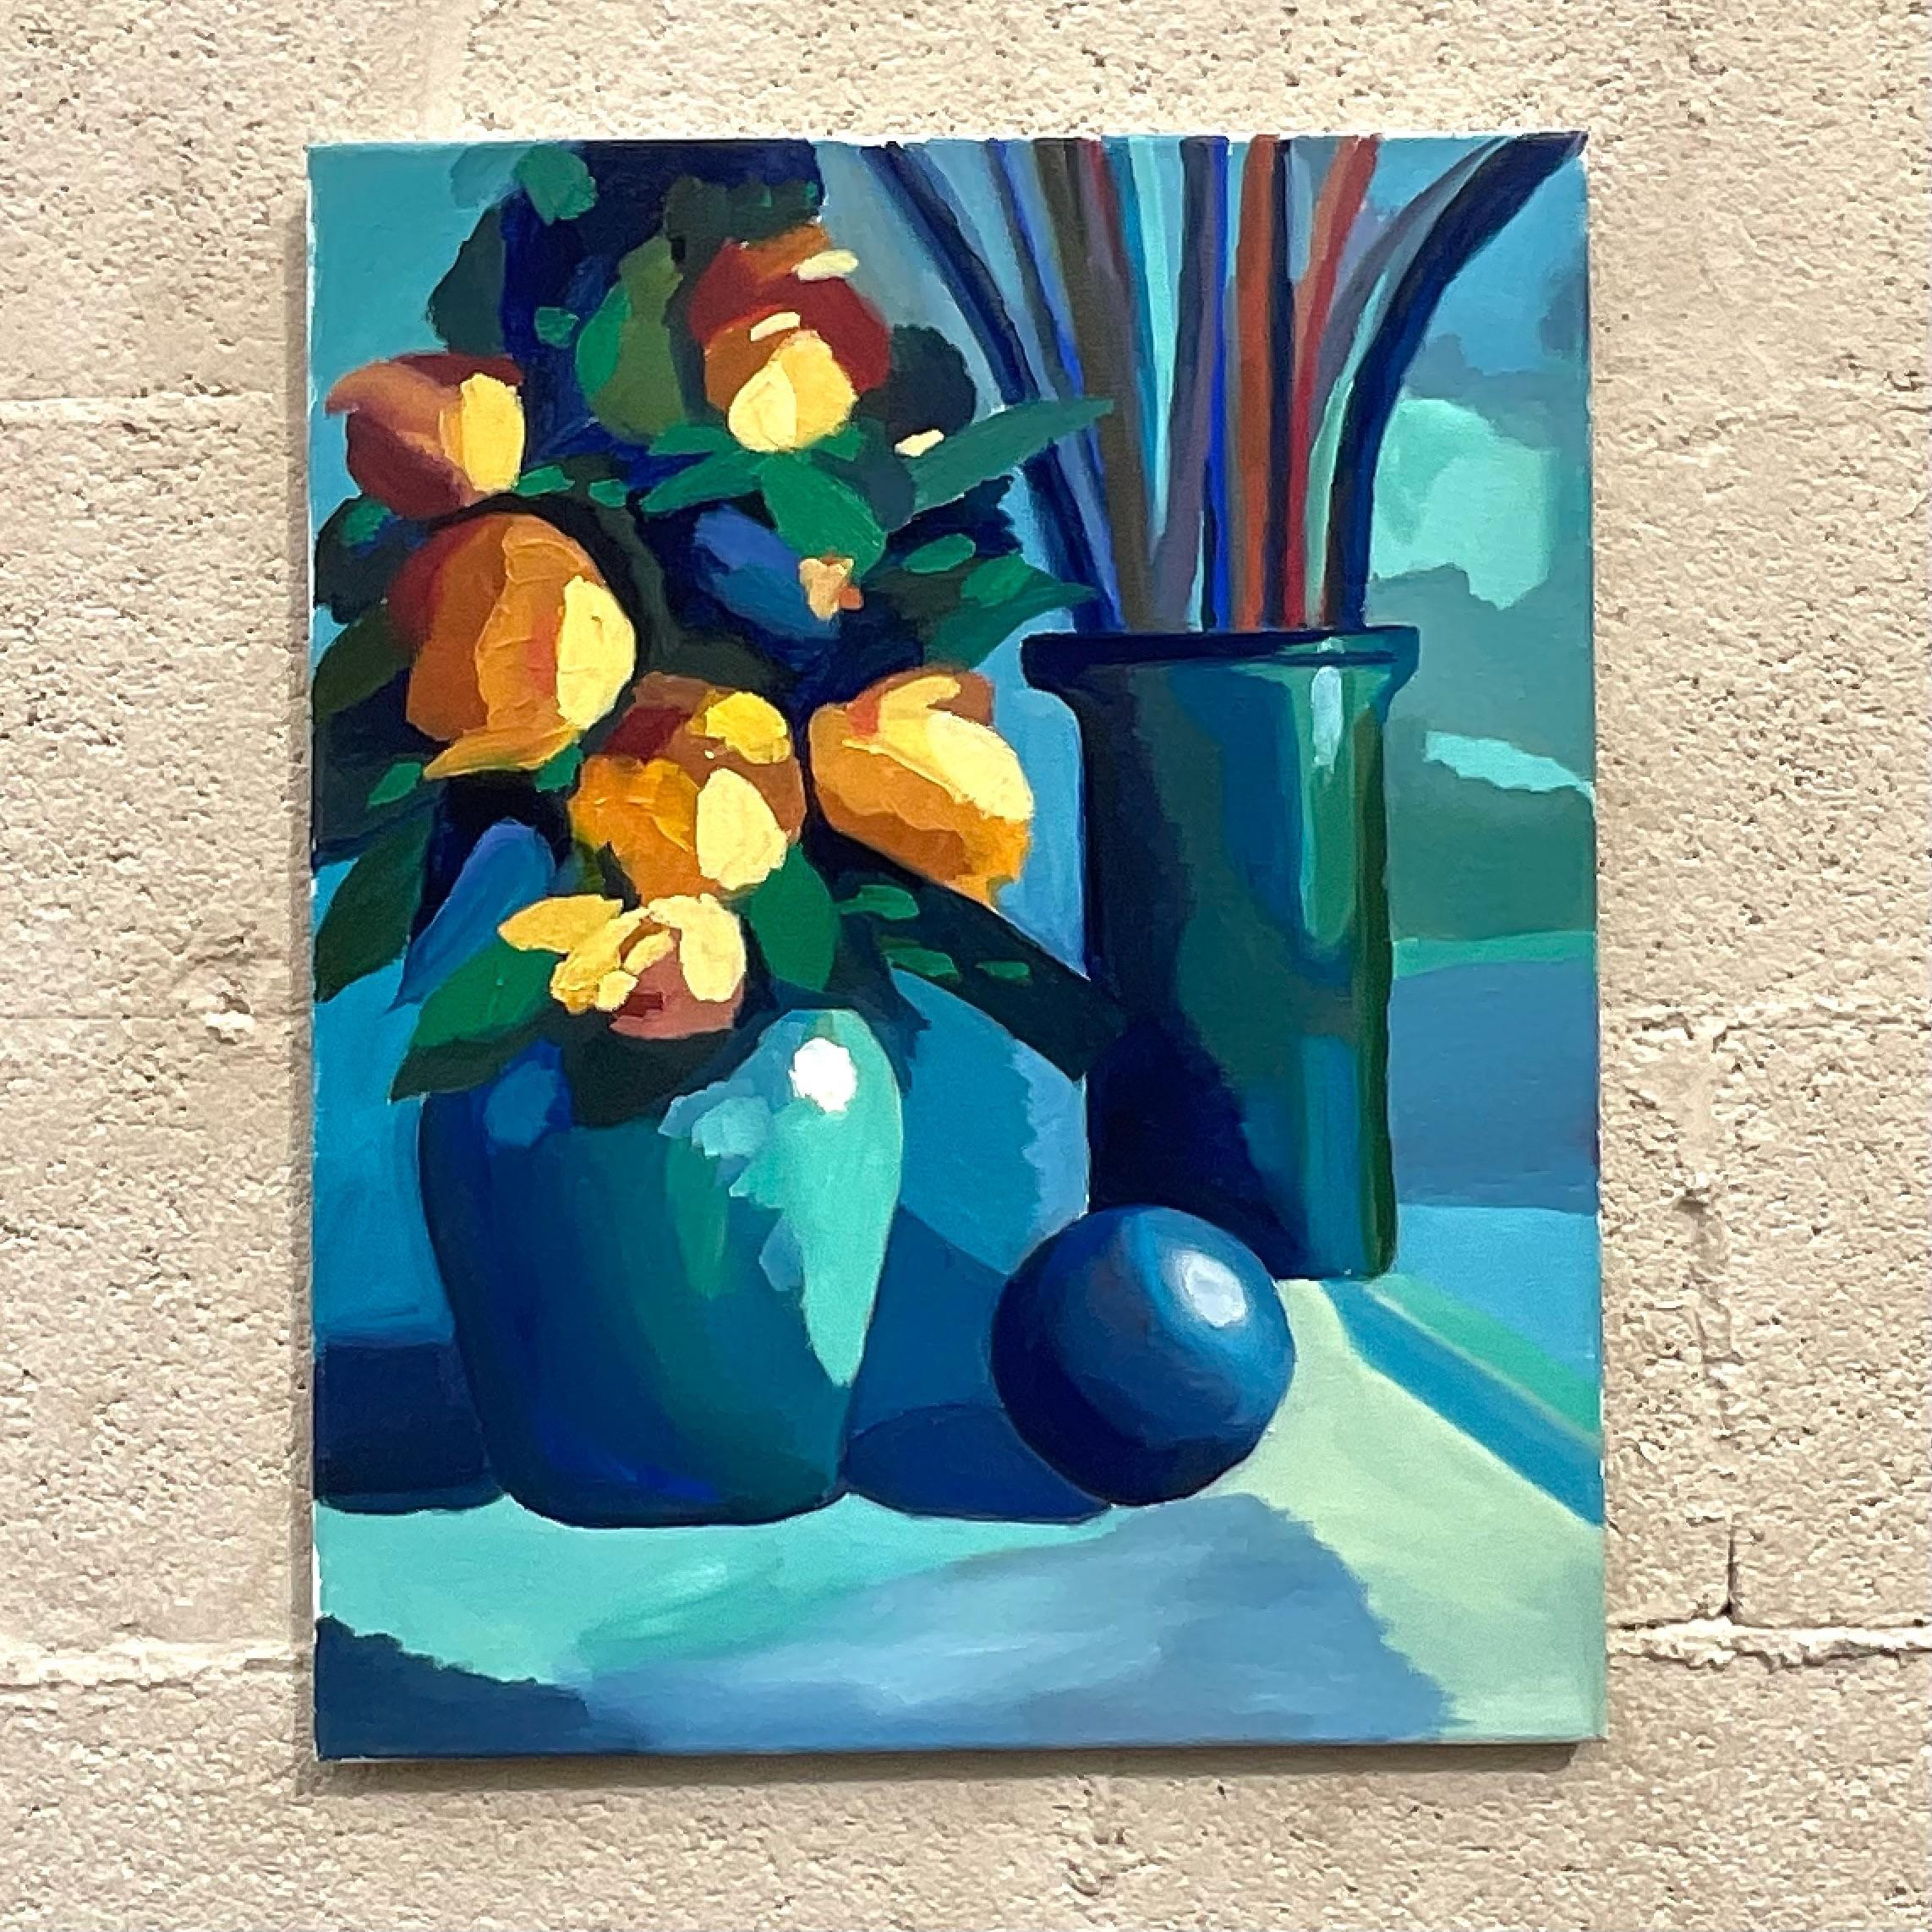 North American Vintage Blue Still Life Oil Painting on Canvas For Sale